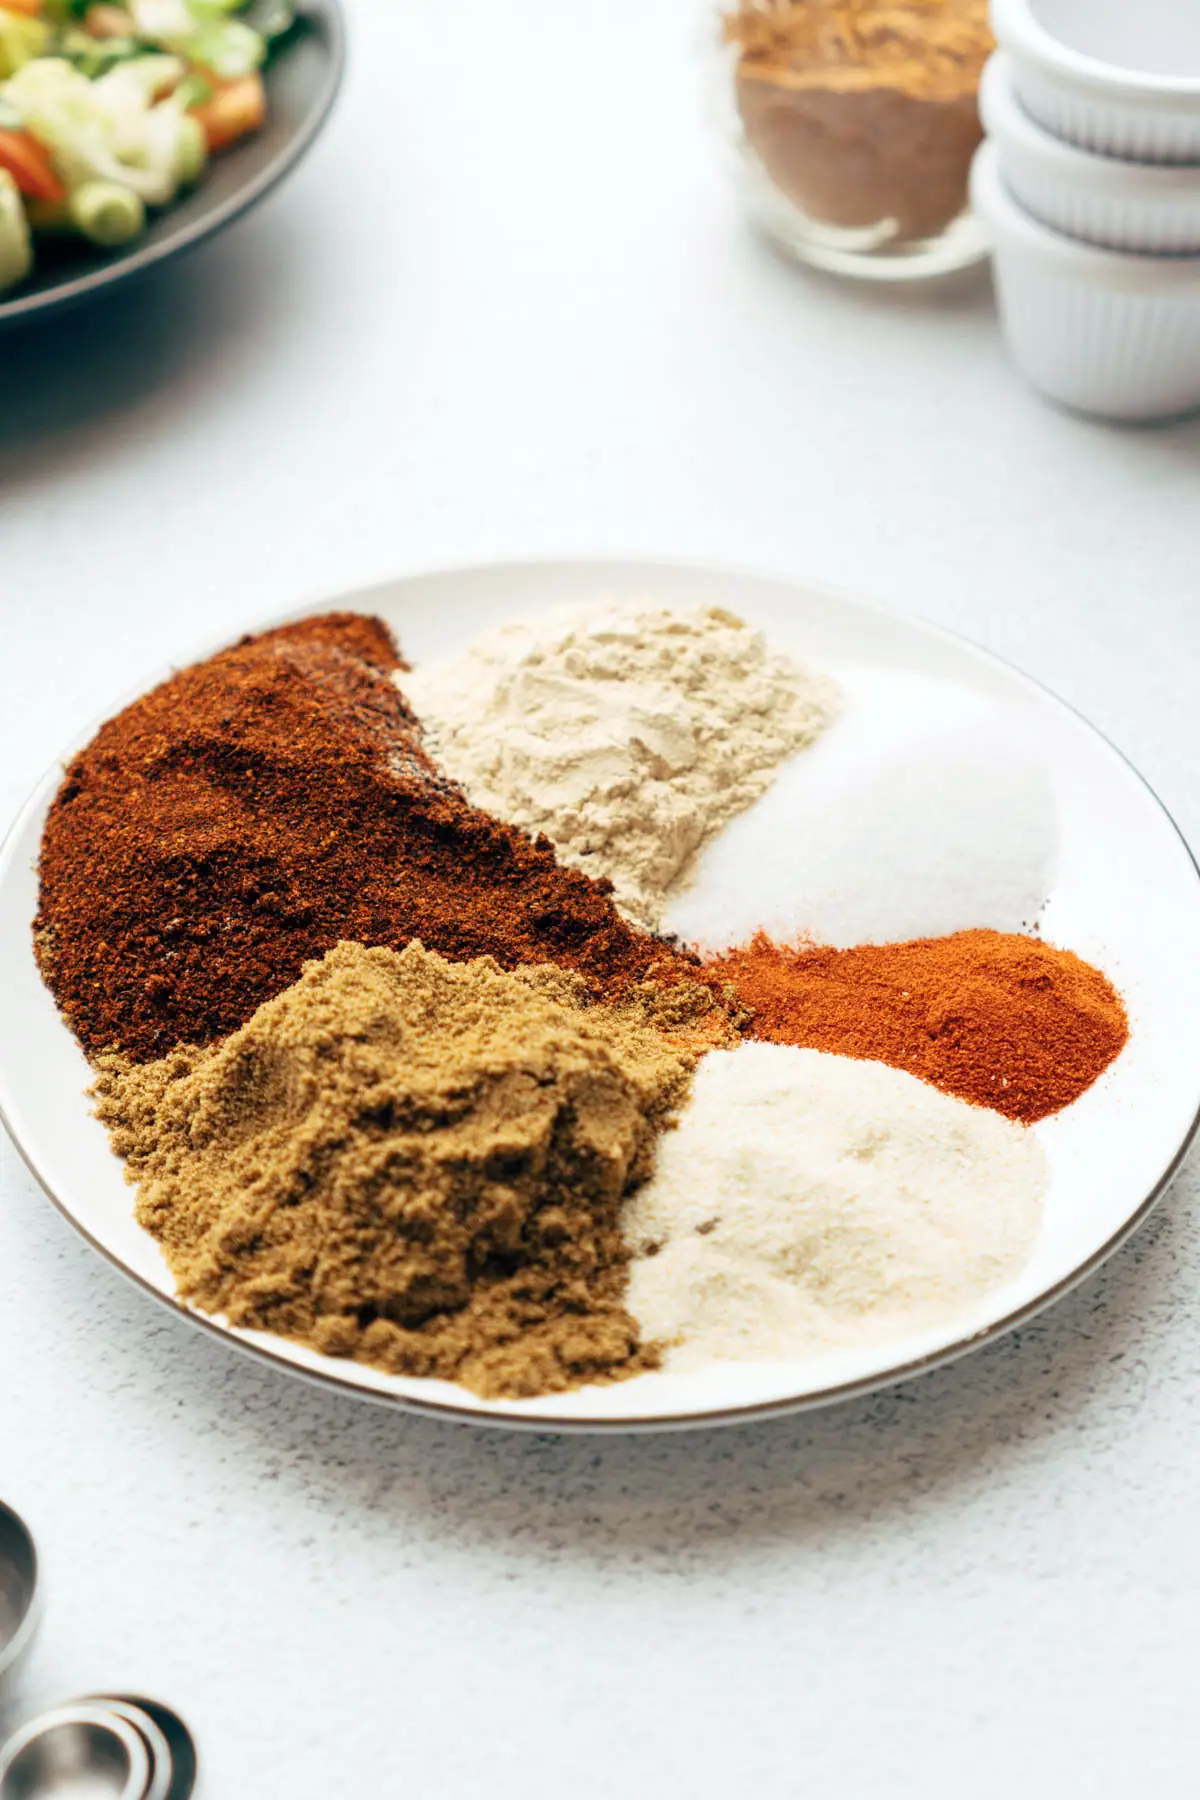 Spices for taco seasoning on plate.